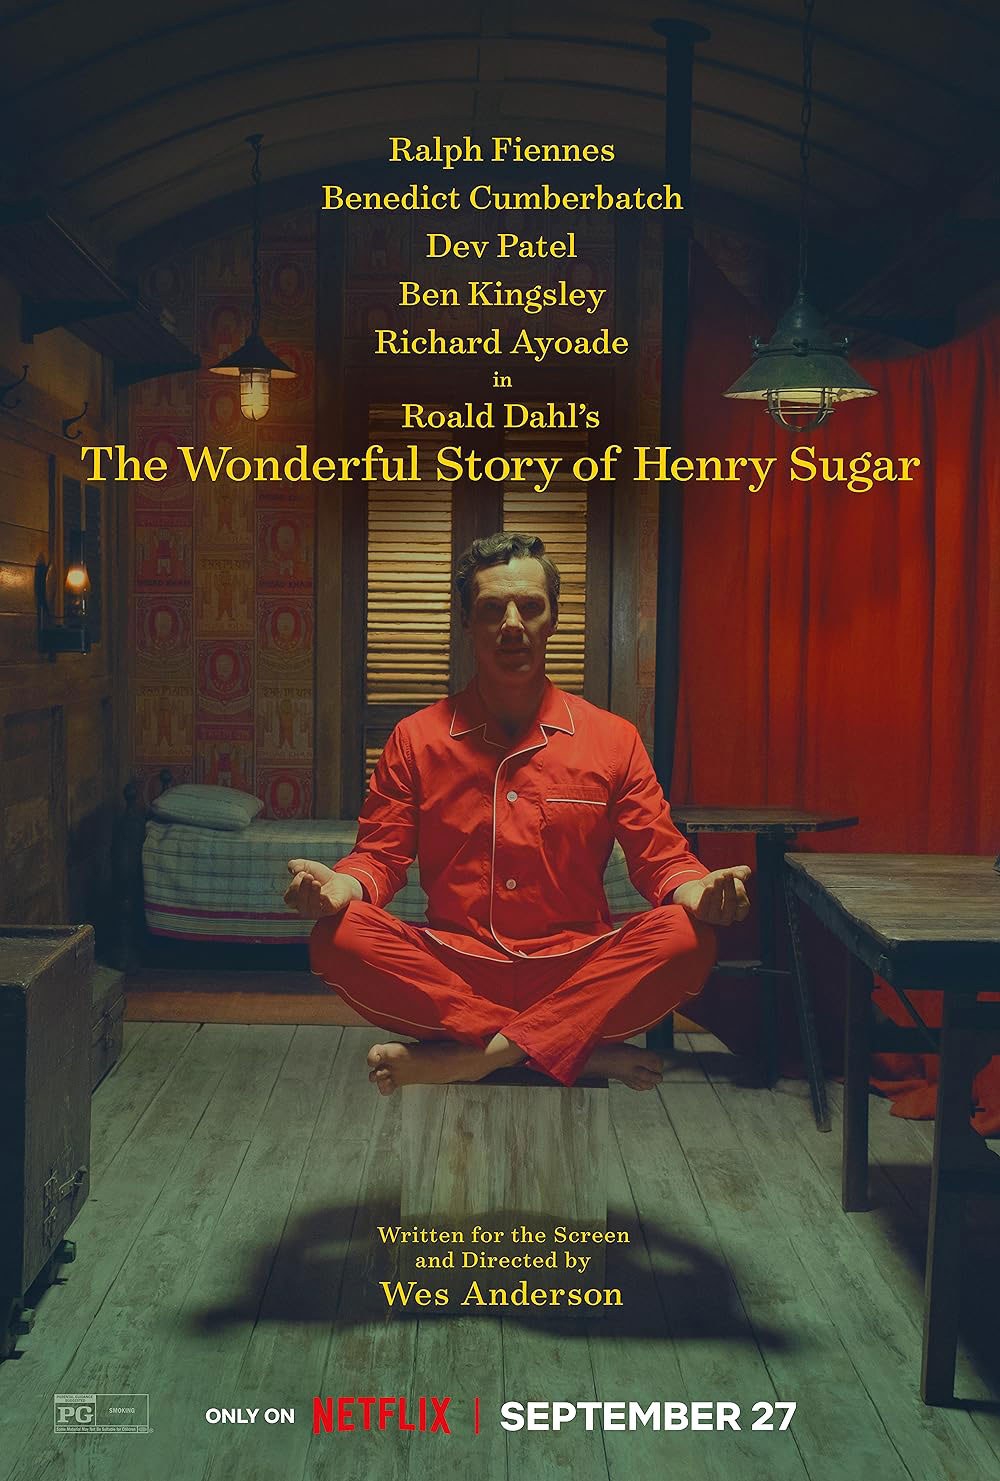 The Wonderful Story of Henry Sugar film poster